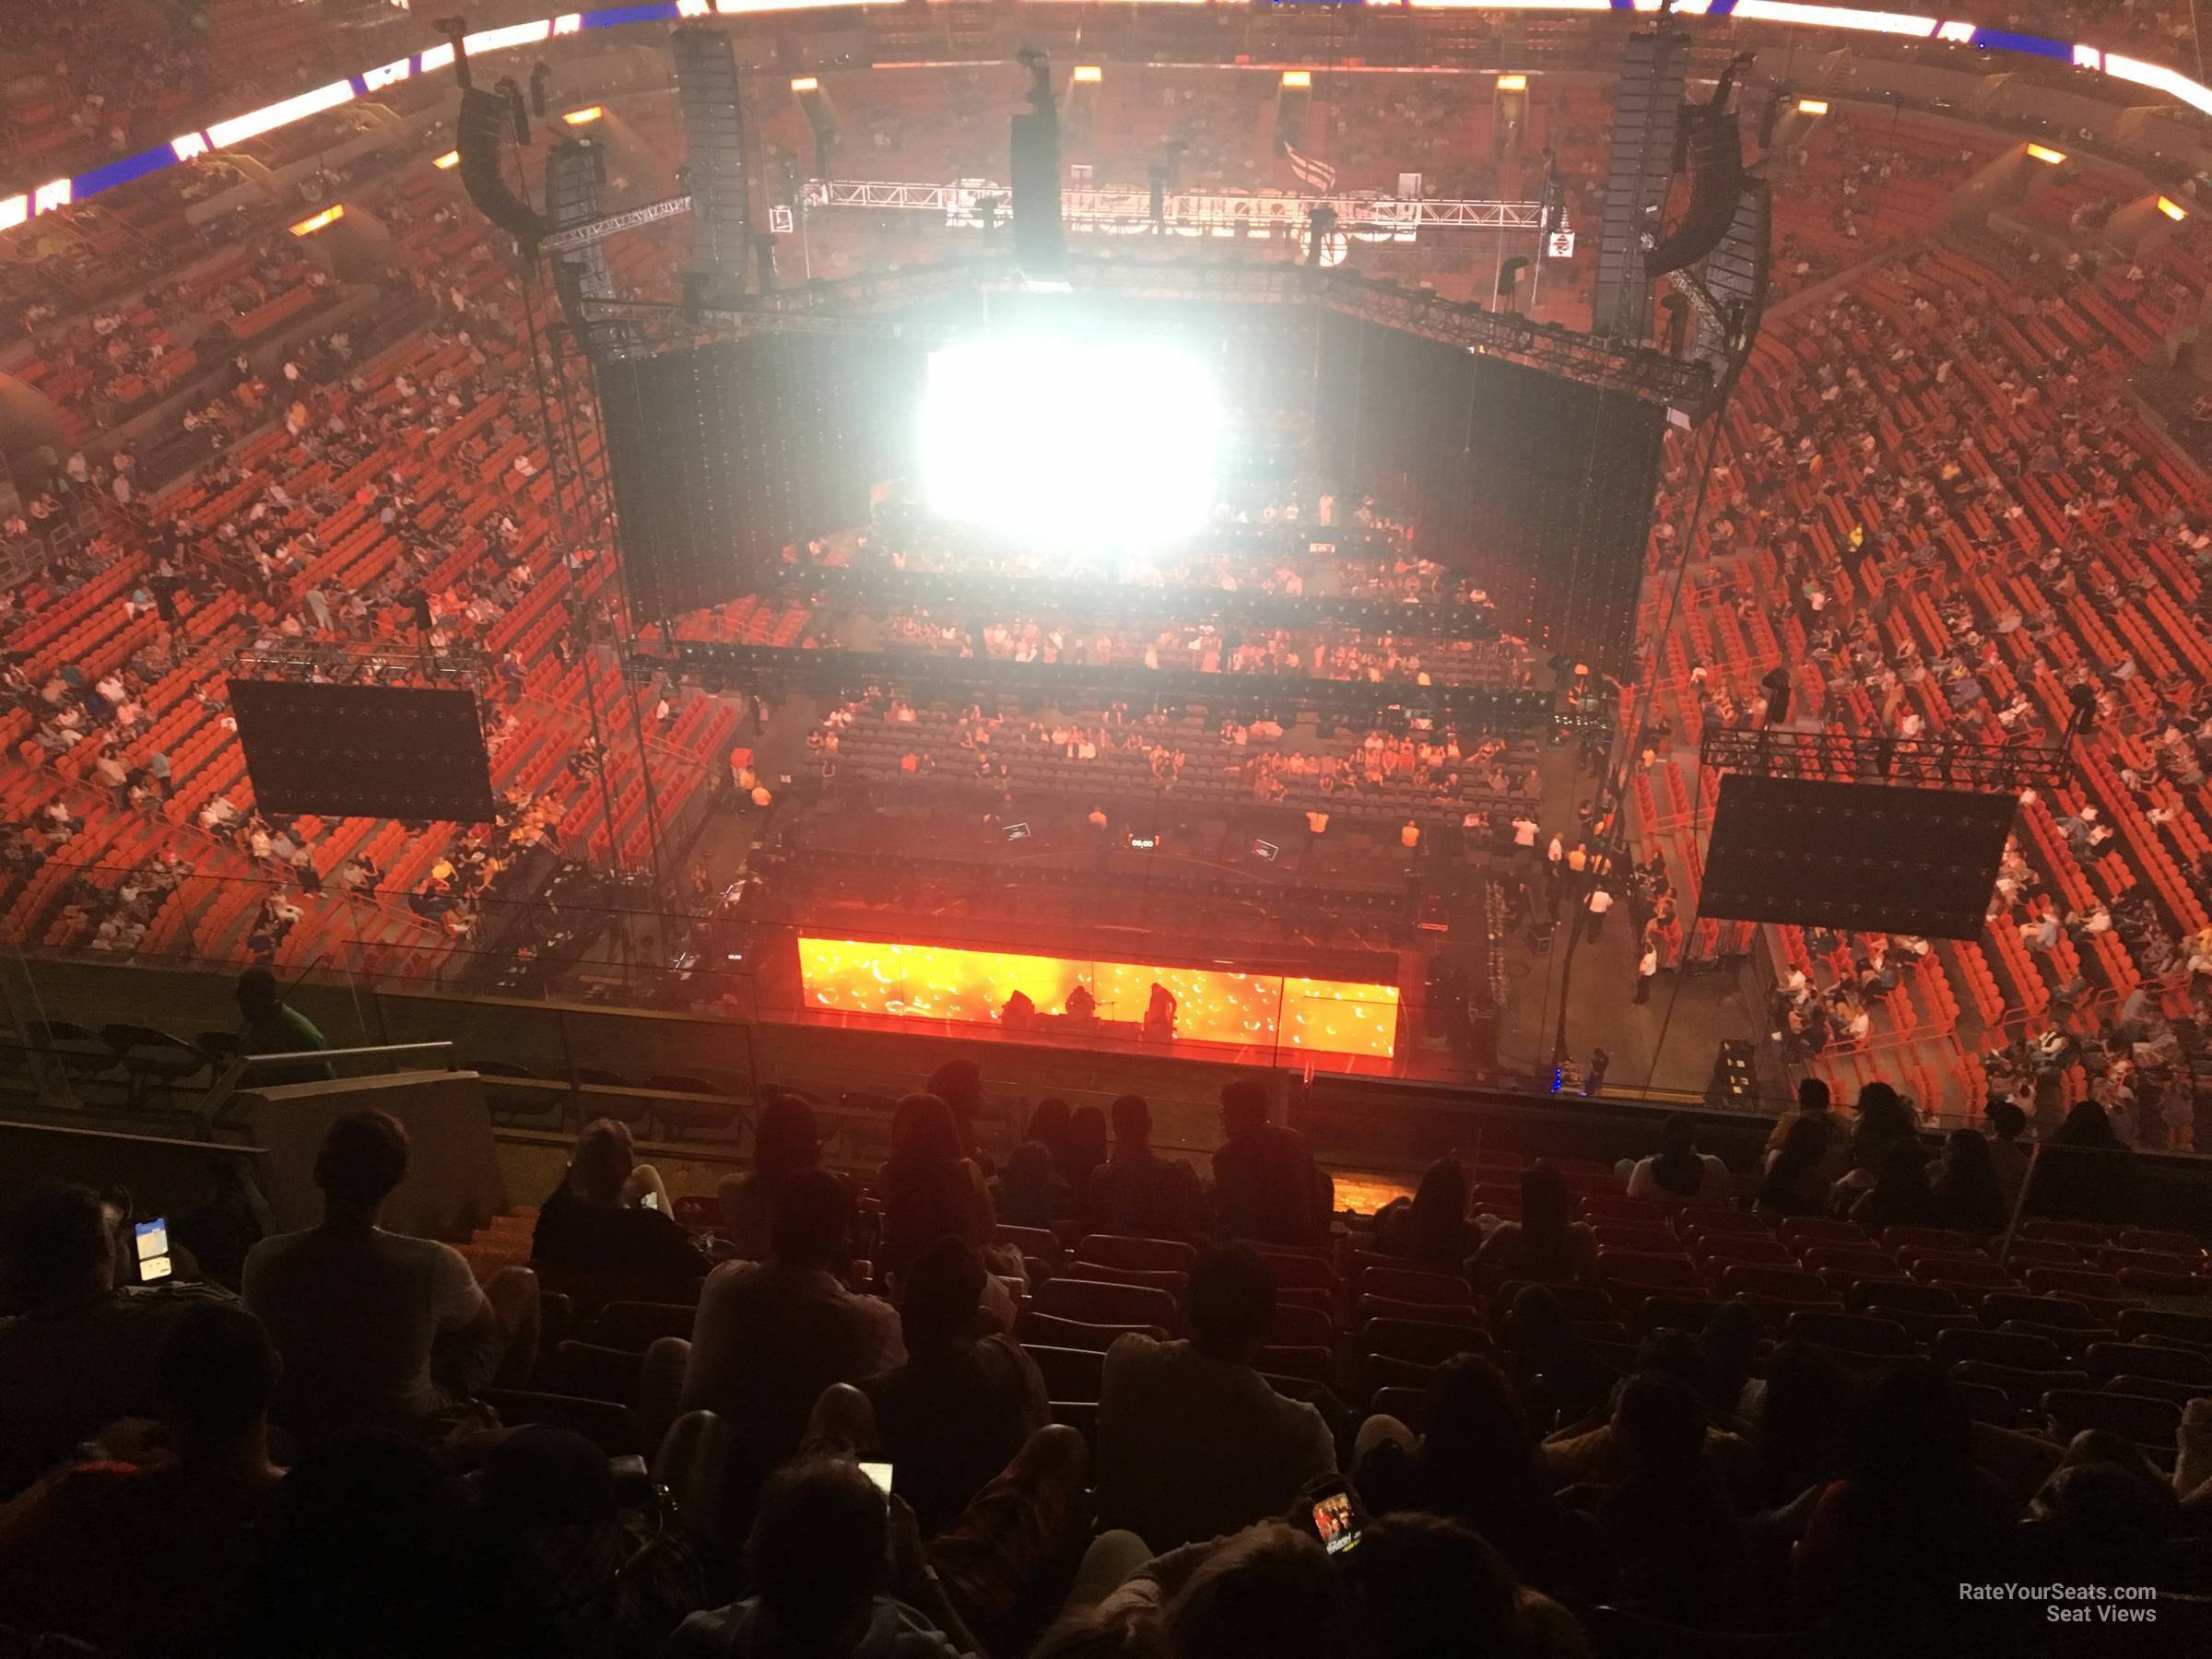 section 405, row 10 seat view  for concert - miami-dade arena